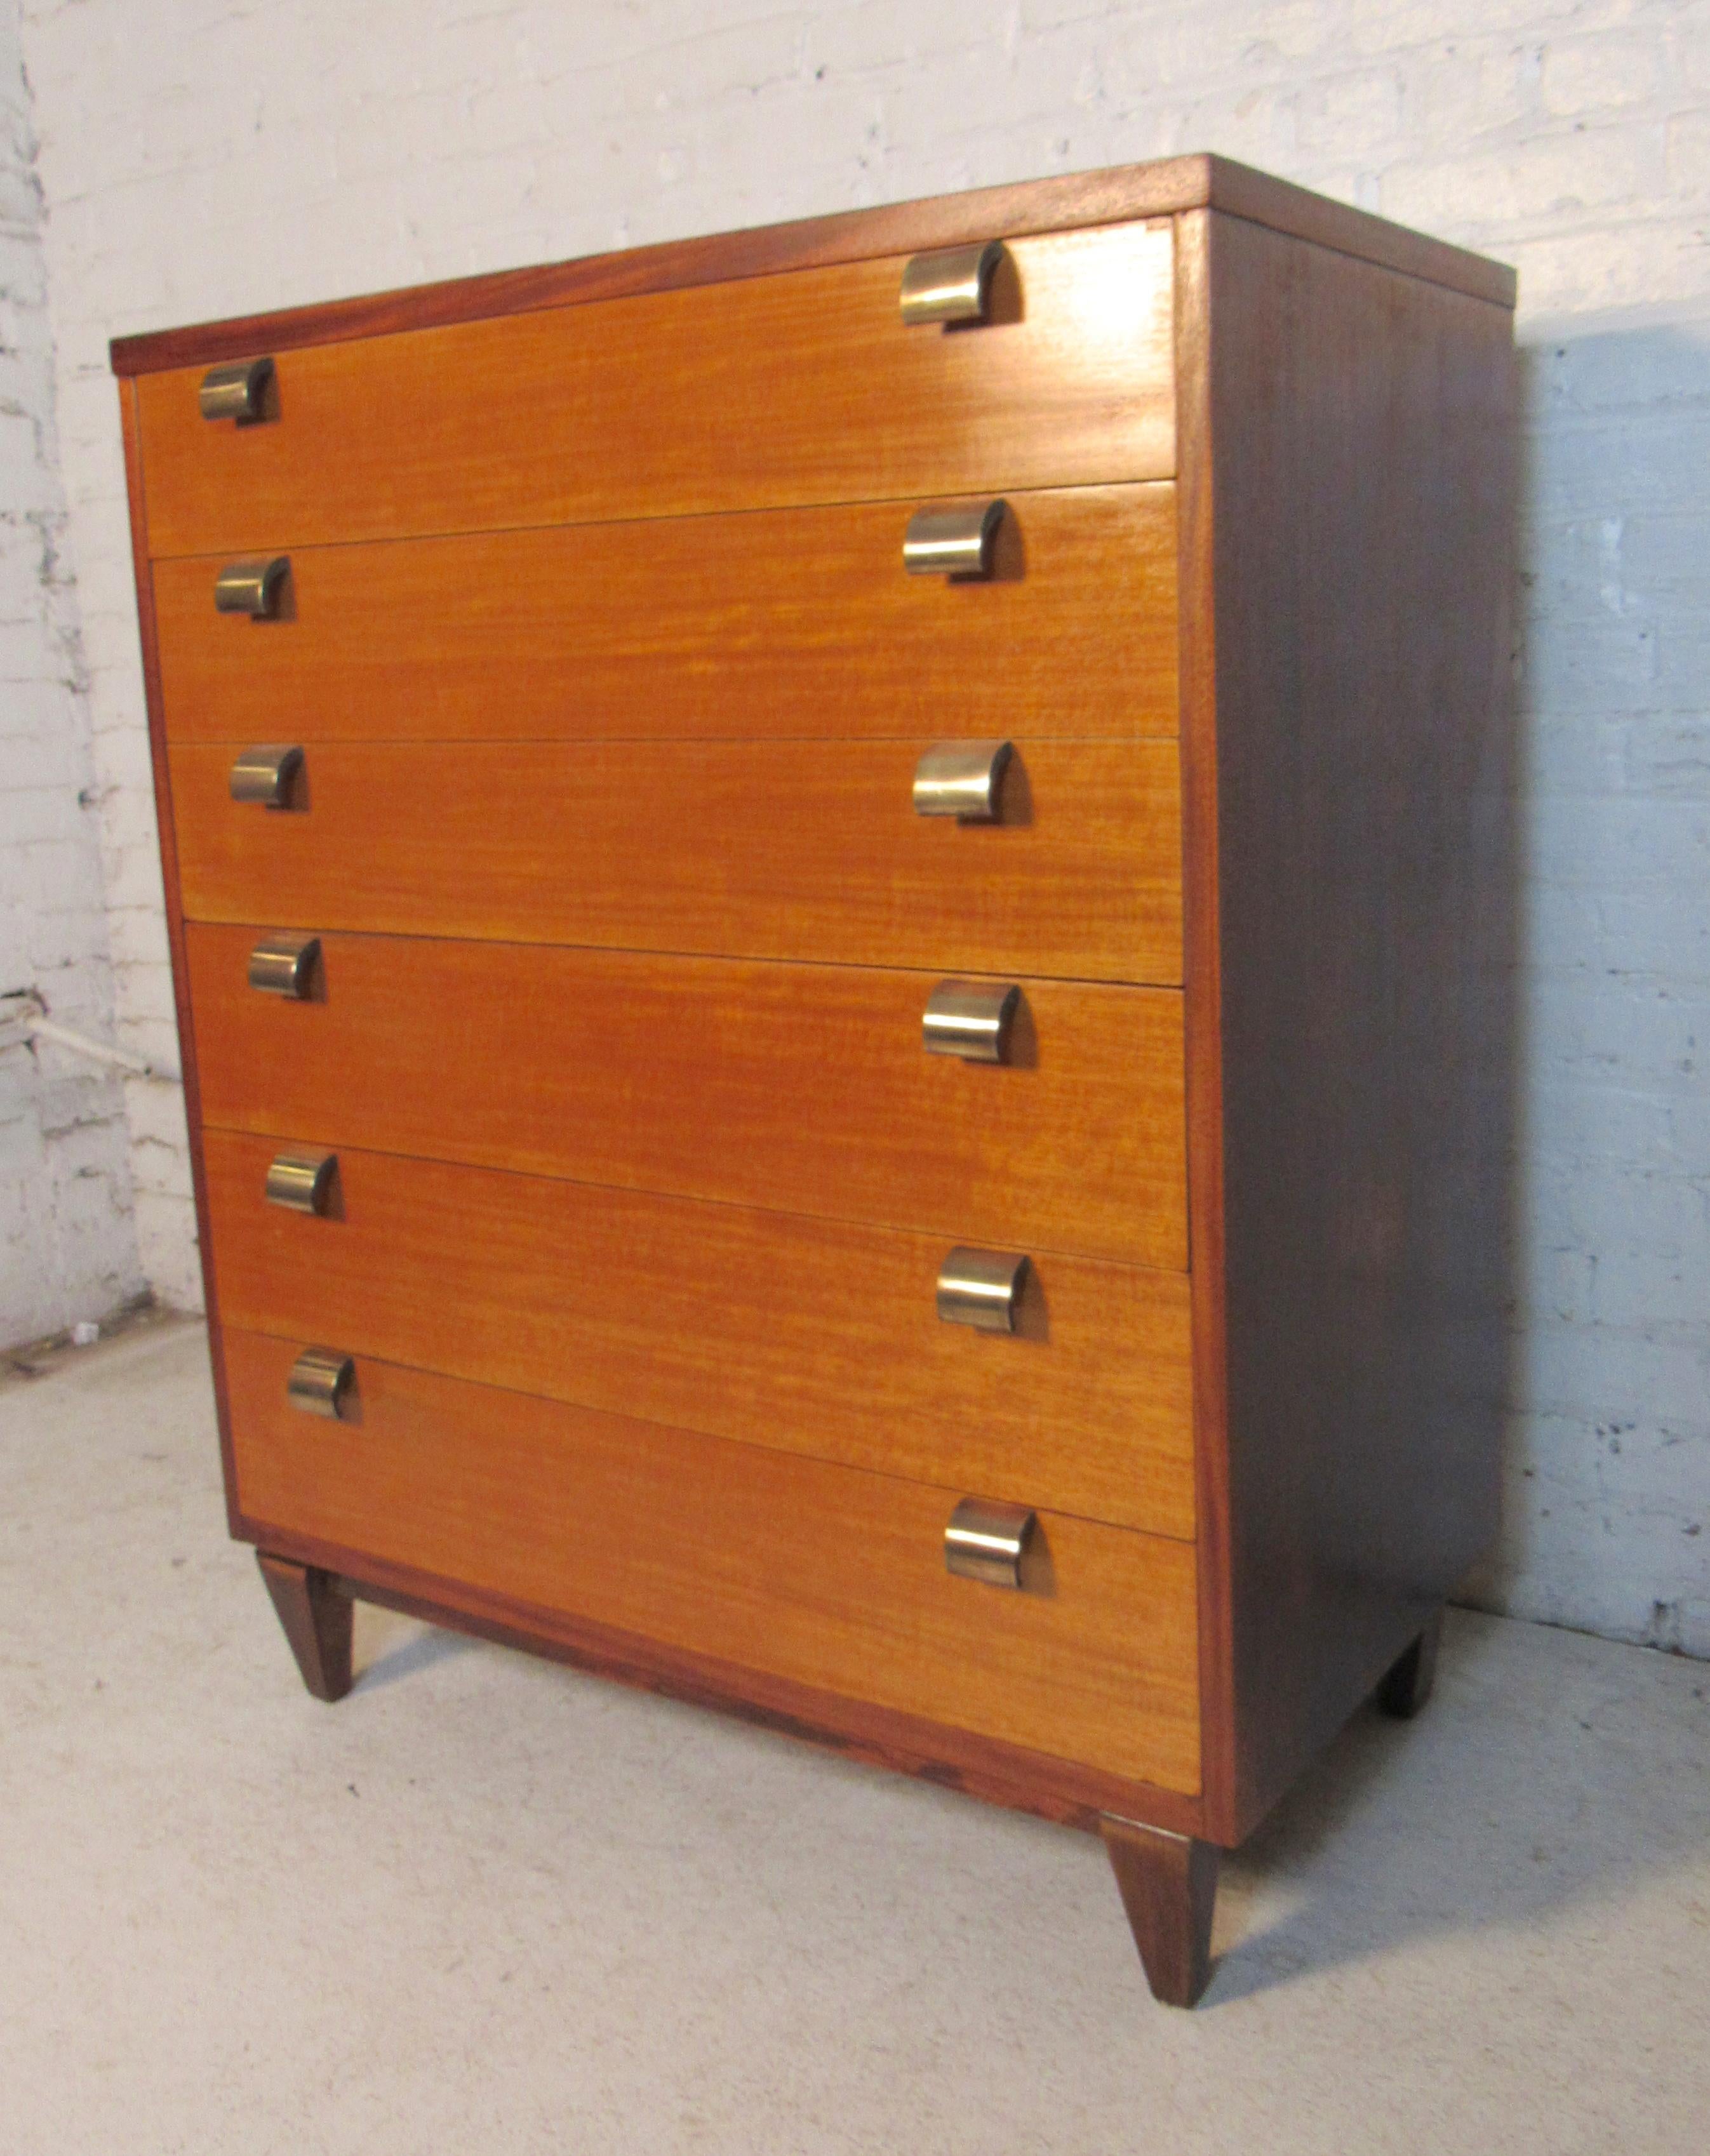 Unique two-tone wood finish is complemented wonderfully with tapered legs and stylish brass handles. Dividers split up the pairs spacious storage drawers making this an impressive vintage pair for any interior. Please confirm the item location (NY